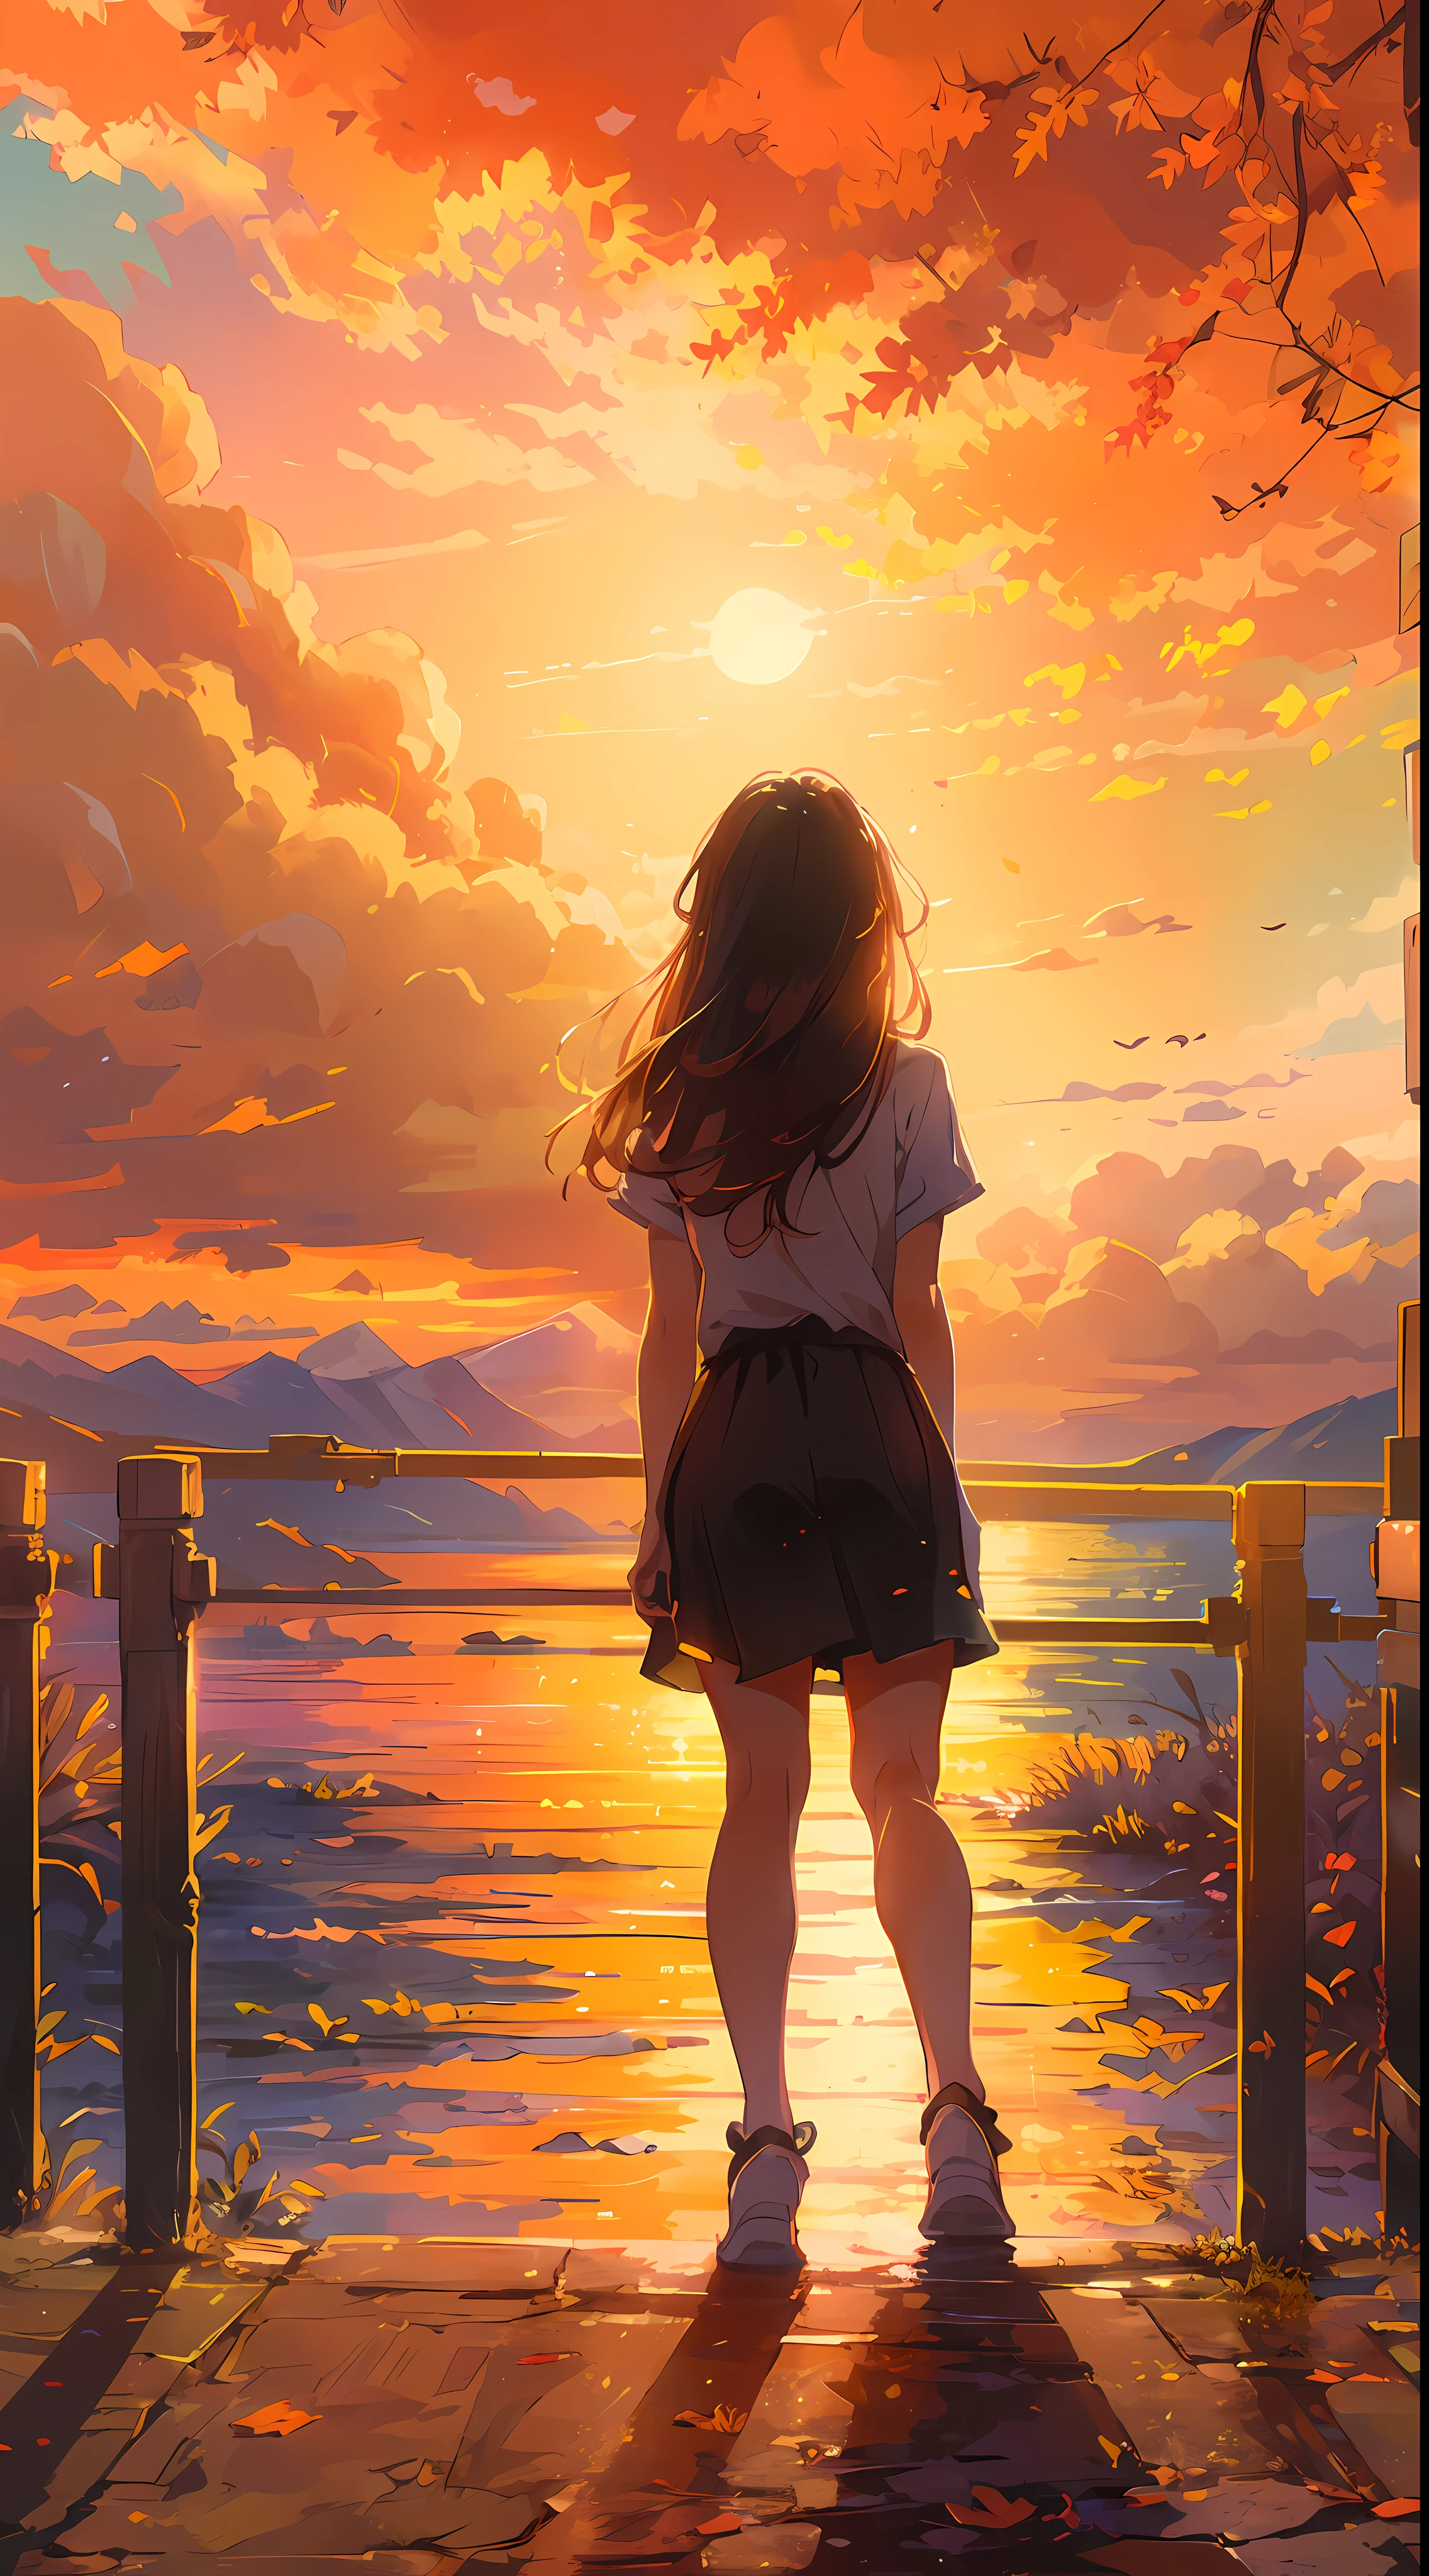 "A mesmerizing scene of sunset, a girl looking at it, from behind, (girl focus0.6), bathed in the golden hues of sunlight and cloud, emanating a vibrant and awe-inspiring spectrum. Masterpiece."